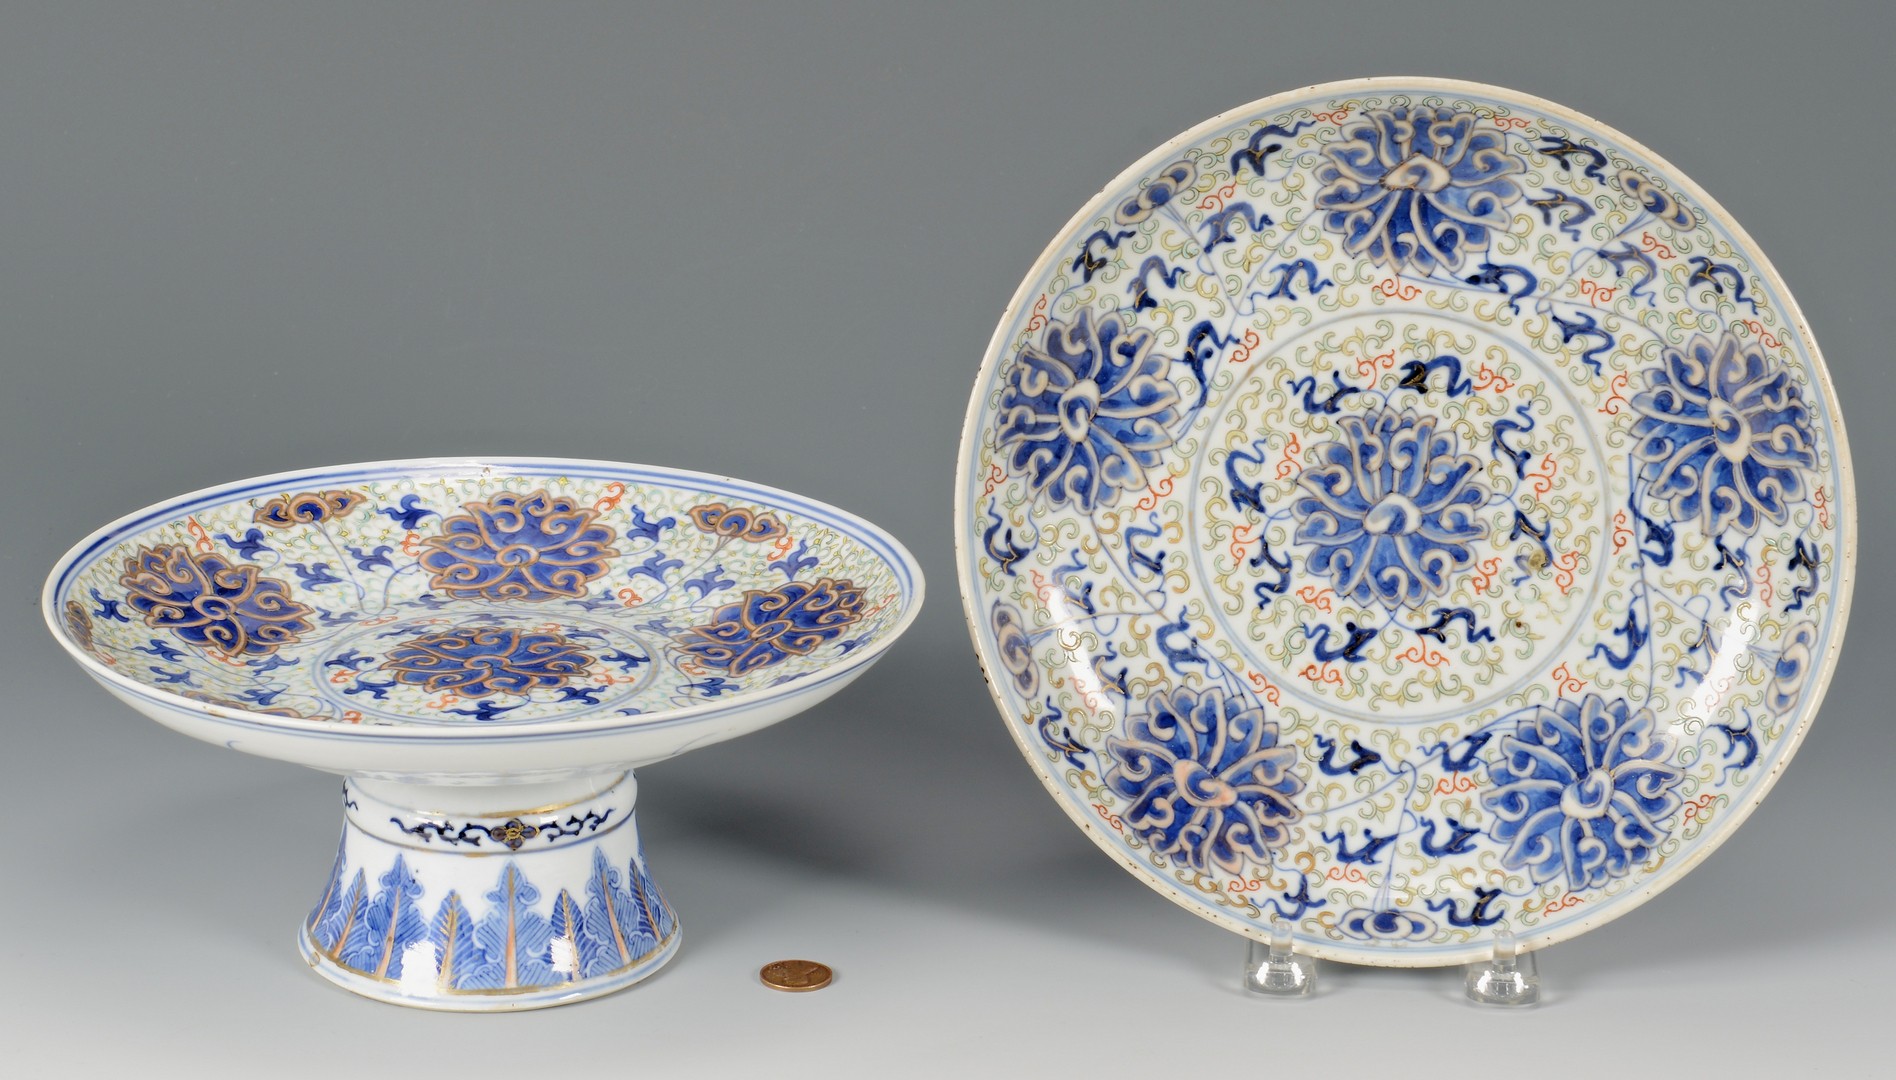 Lot 21: Chinese Famille Verte Compote & Plate